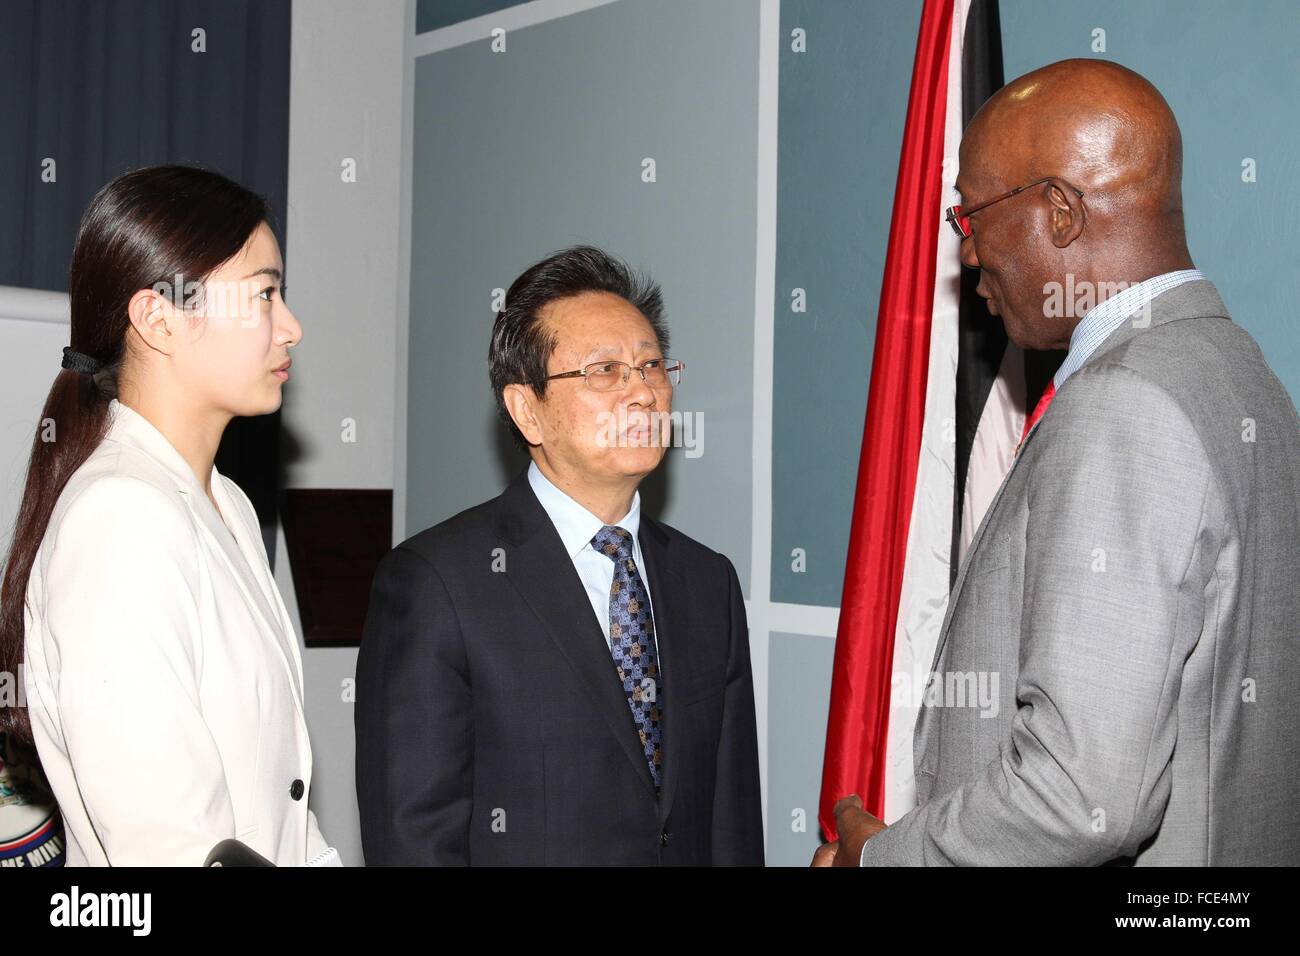 Port Of Spain, Trinidad and Tobago. 20th Jan, 2016. Chen Changzhi (C), vice chairman of the Standing Committee of China's National People's Congress, meets with Trinidad and Tobago's Prime Minister Keith Rowley (R), in Port of Spain, capital of Trinidad and Tobago, on Jan. 20, 2016. Chen is on a visit to Trinidad and Tobago from Jan. 20 to 22. Credit:  Gao Xing/Xinhua/Alamy Live News Stock Photo